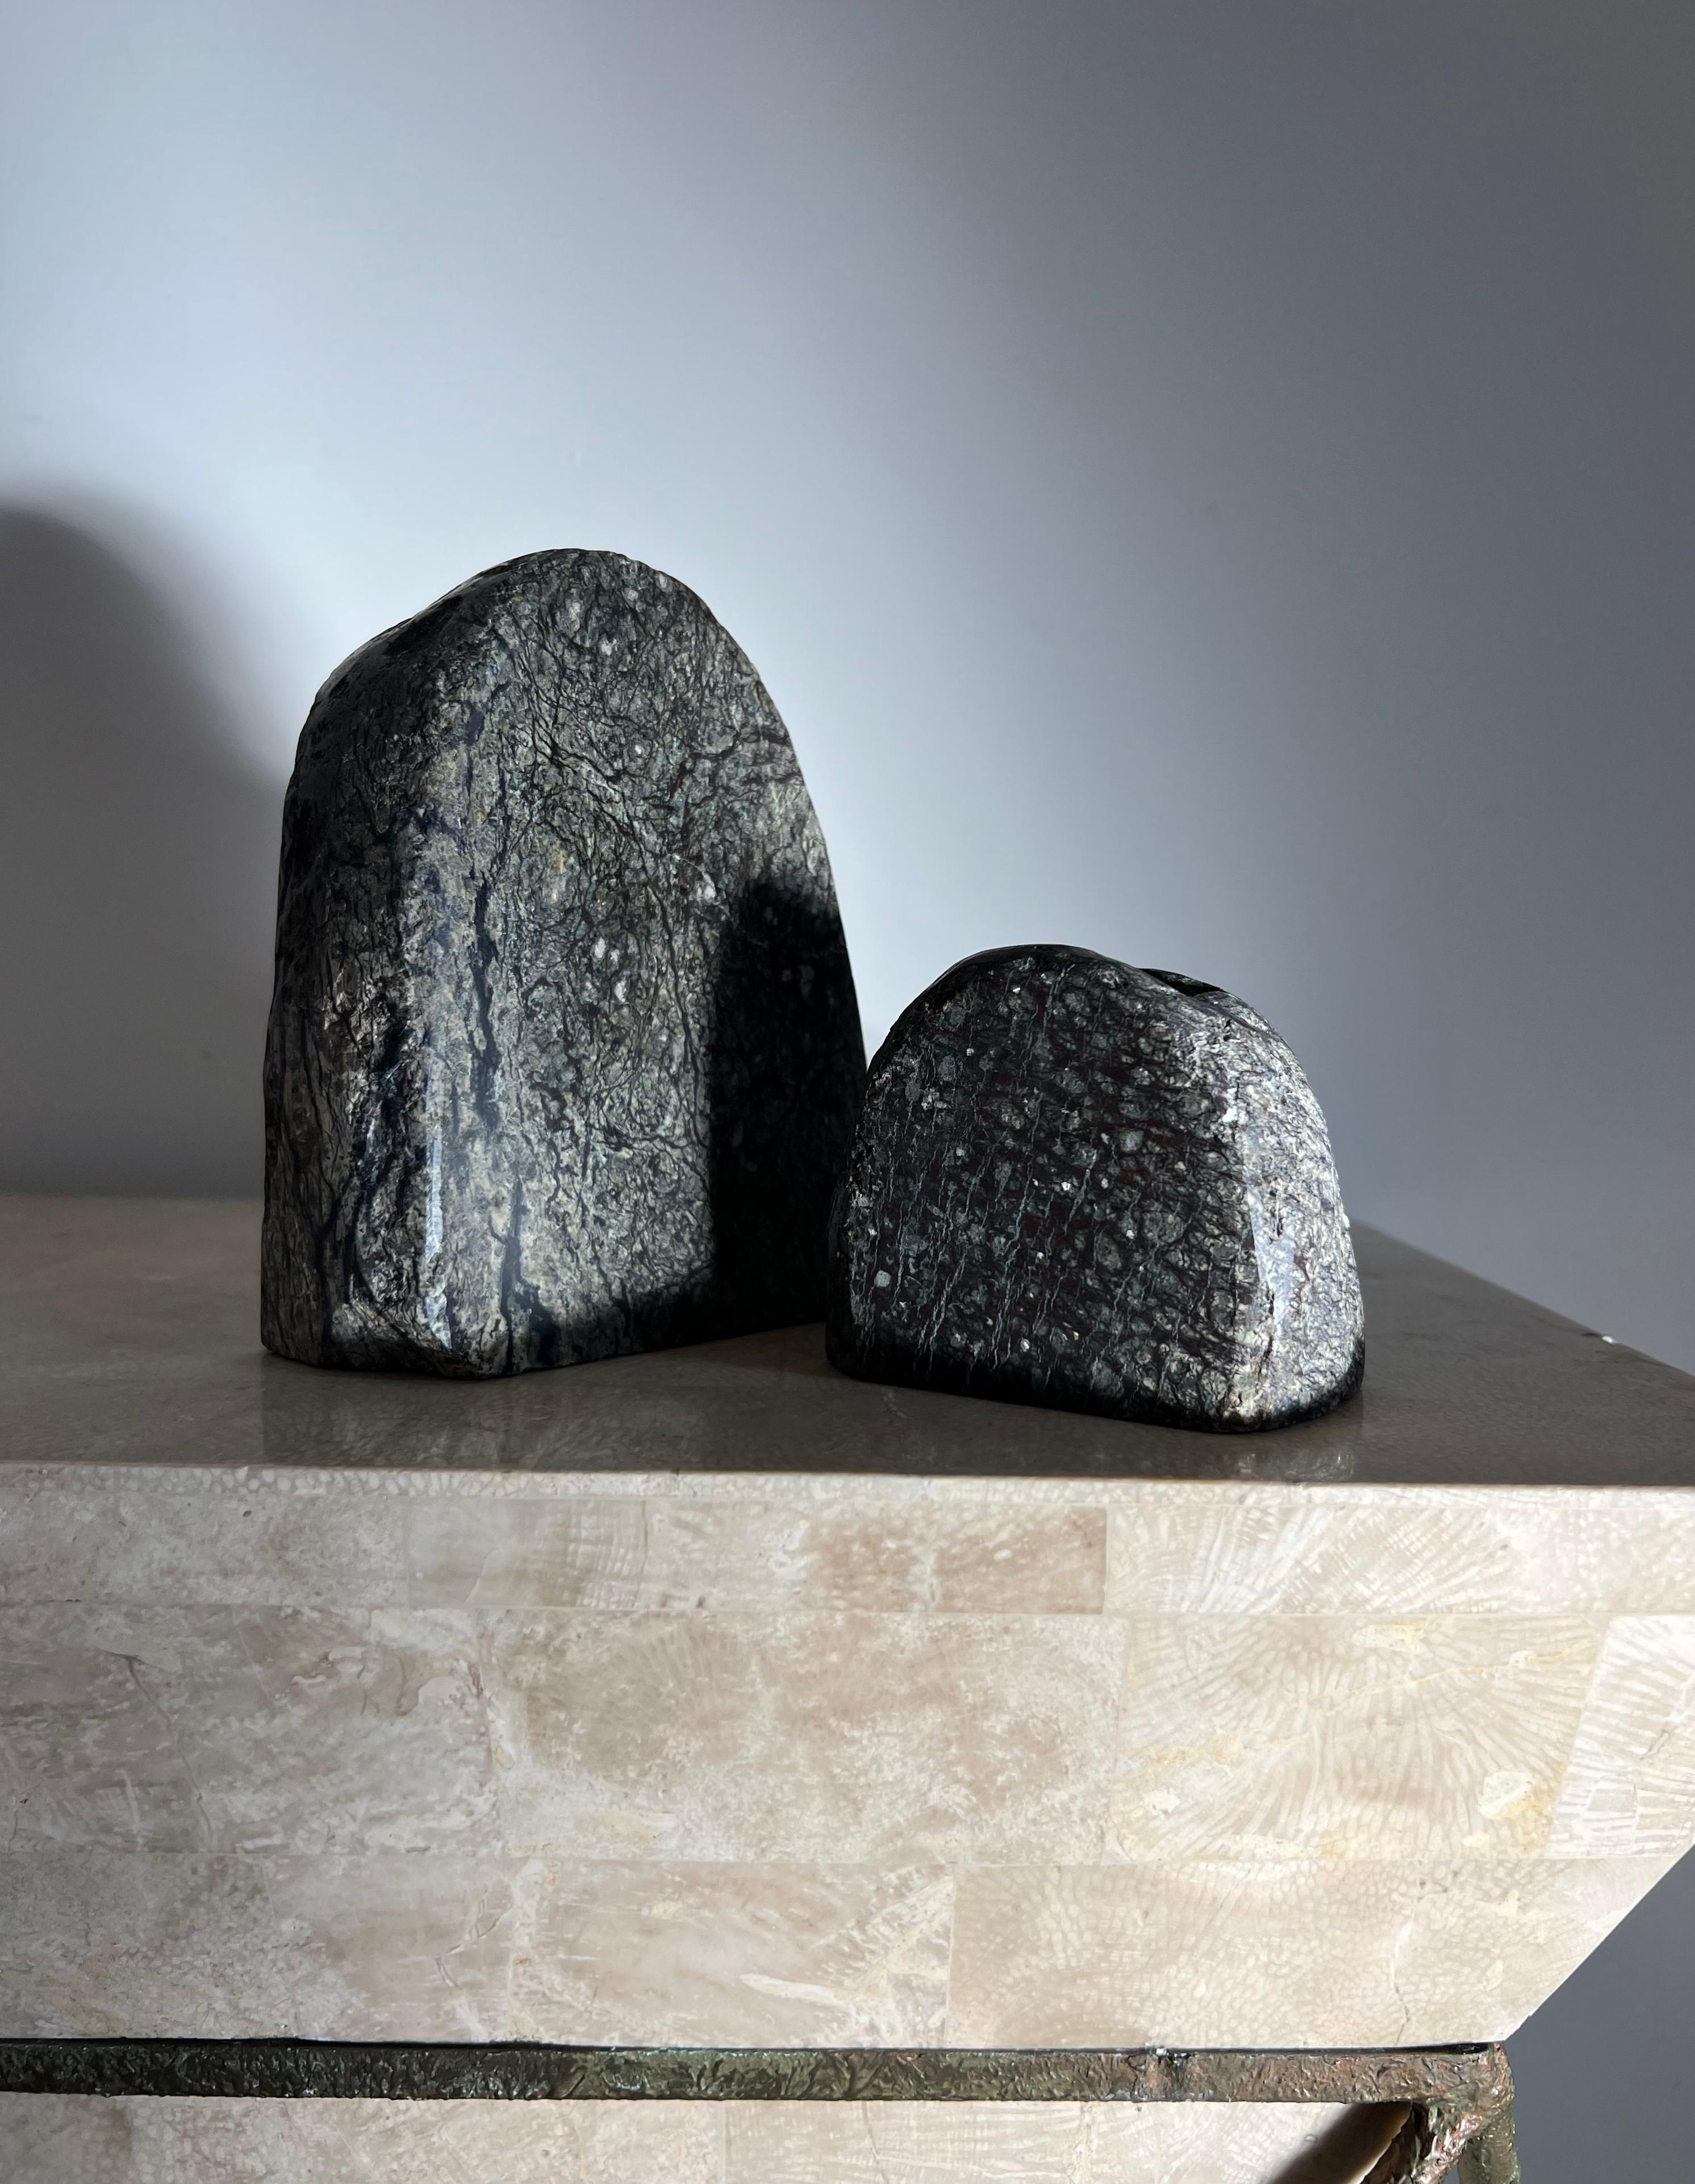 A pair of bouldercore candelaria, 1970s. Tones of basalt, moss, and aubergine. Real stone - heavy. Felted bases. Pick up in LA or worldwide delivery options available.
Big: 4.5” W x 2” D x 6” H
Small: 3.5” W x 2” D x 3” H